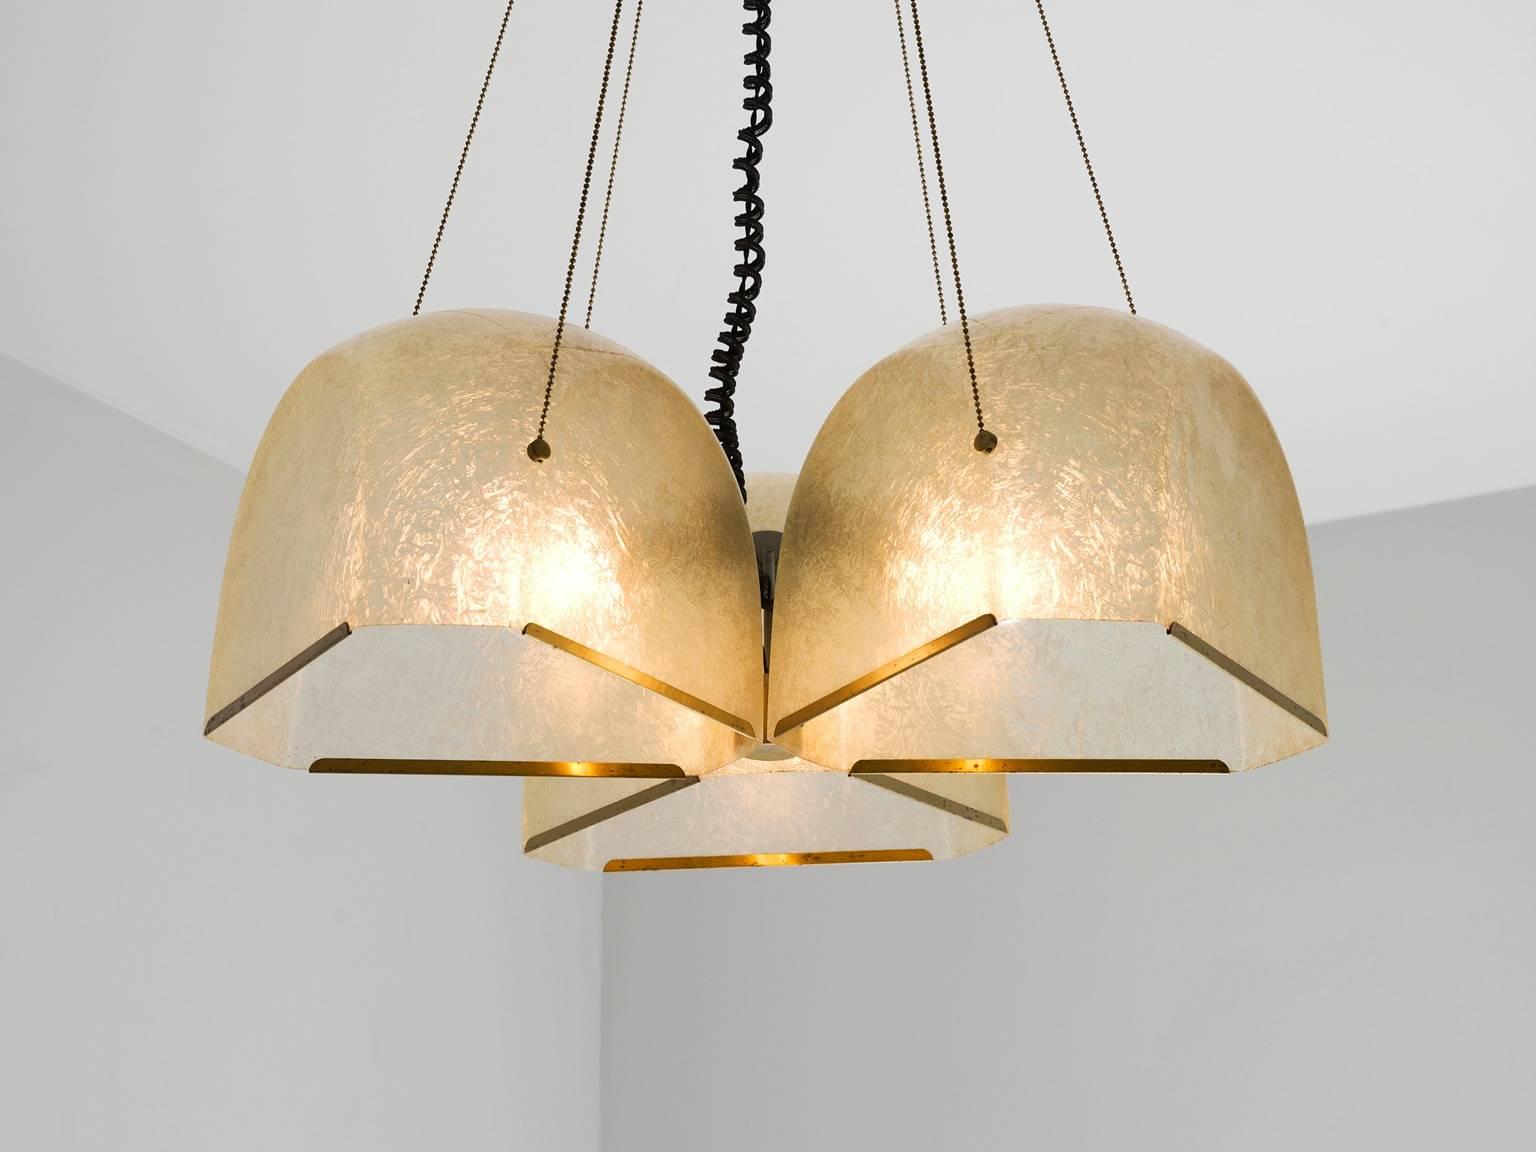 Chandelier, in fiberglass and brass by Salvatore Gregorietti, Italy, 1960s.

Sculptural chandelier by Italian designer Salvatore Gregorietti. The pendant is build op on three large resin shades. The metal wires create a beautiful composition to the